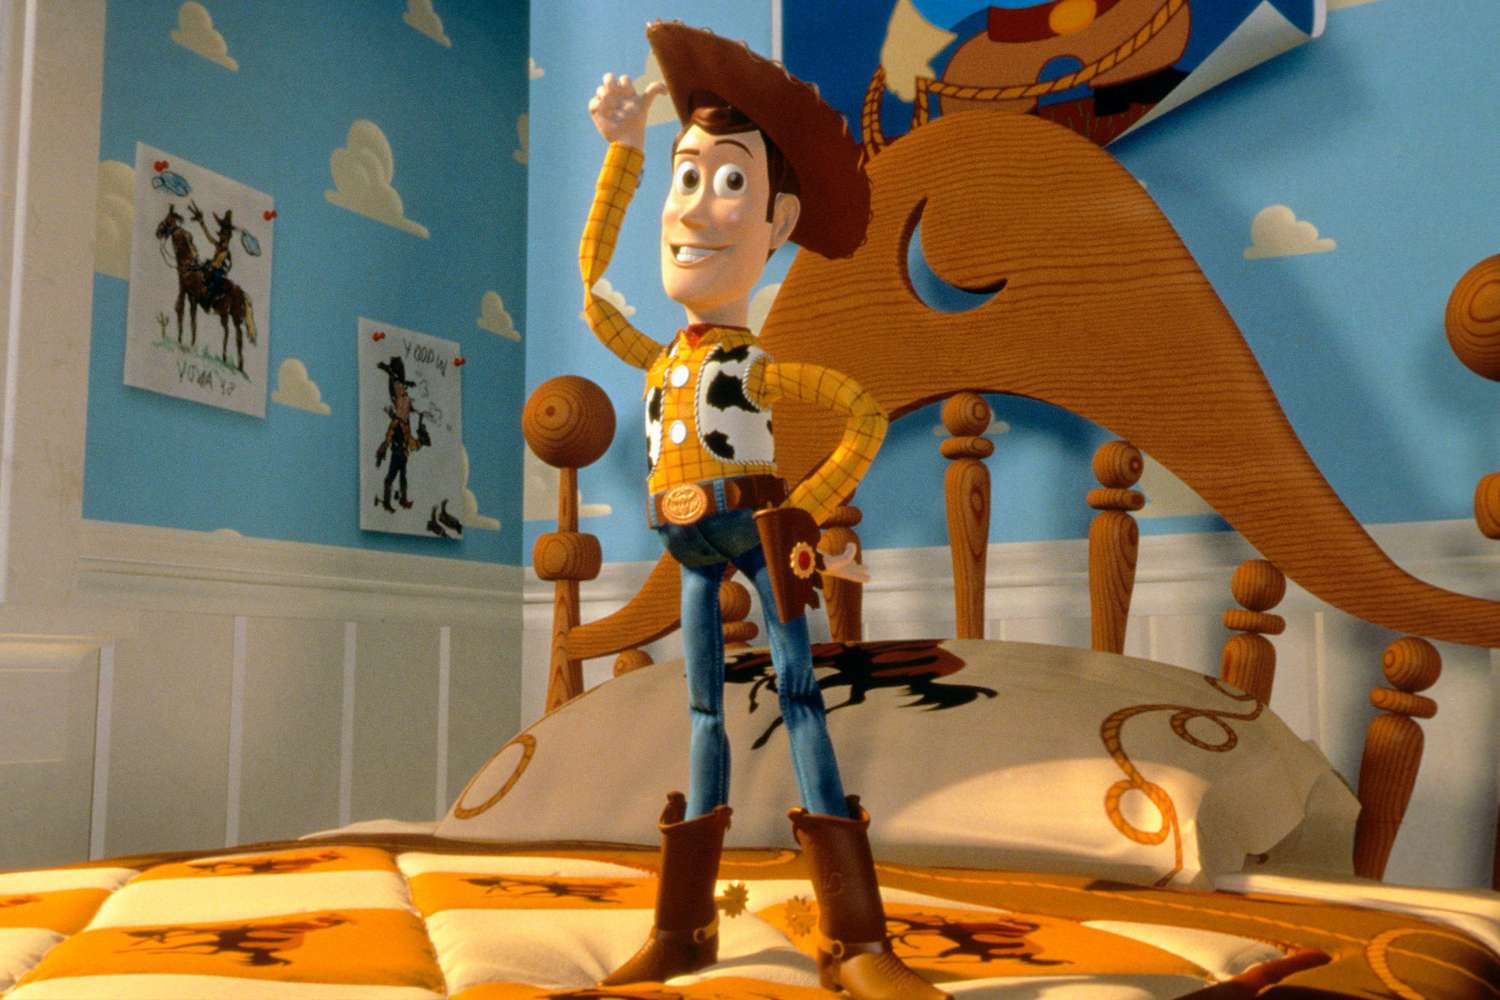 TOY STORY, Tom Hanks [voice], 1995. © Buena Vista Pictures/courtesy Everett Collection